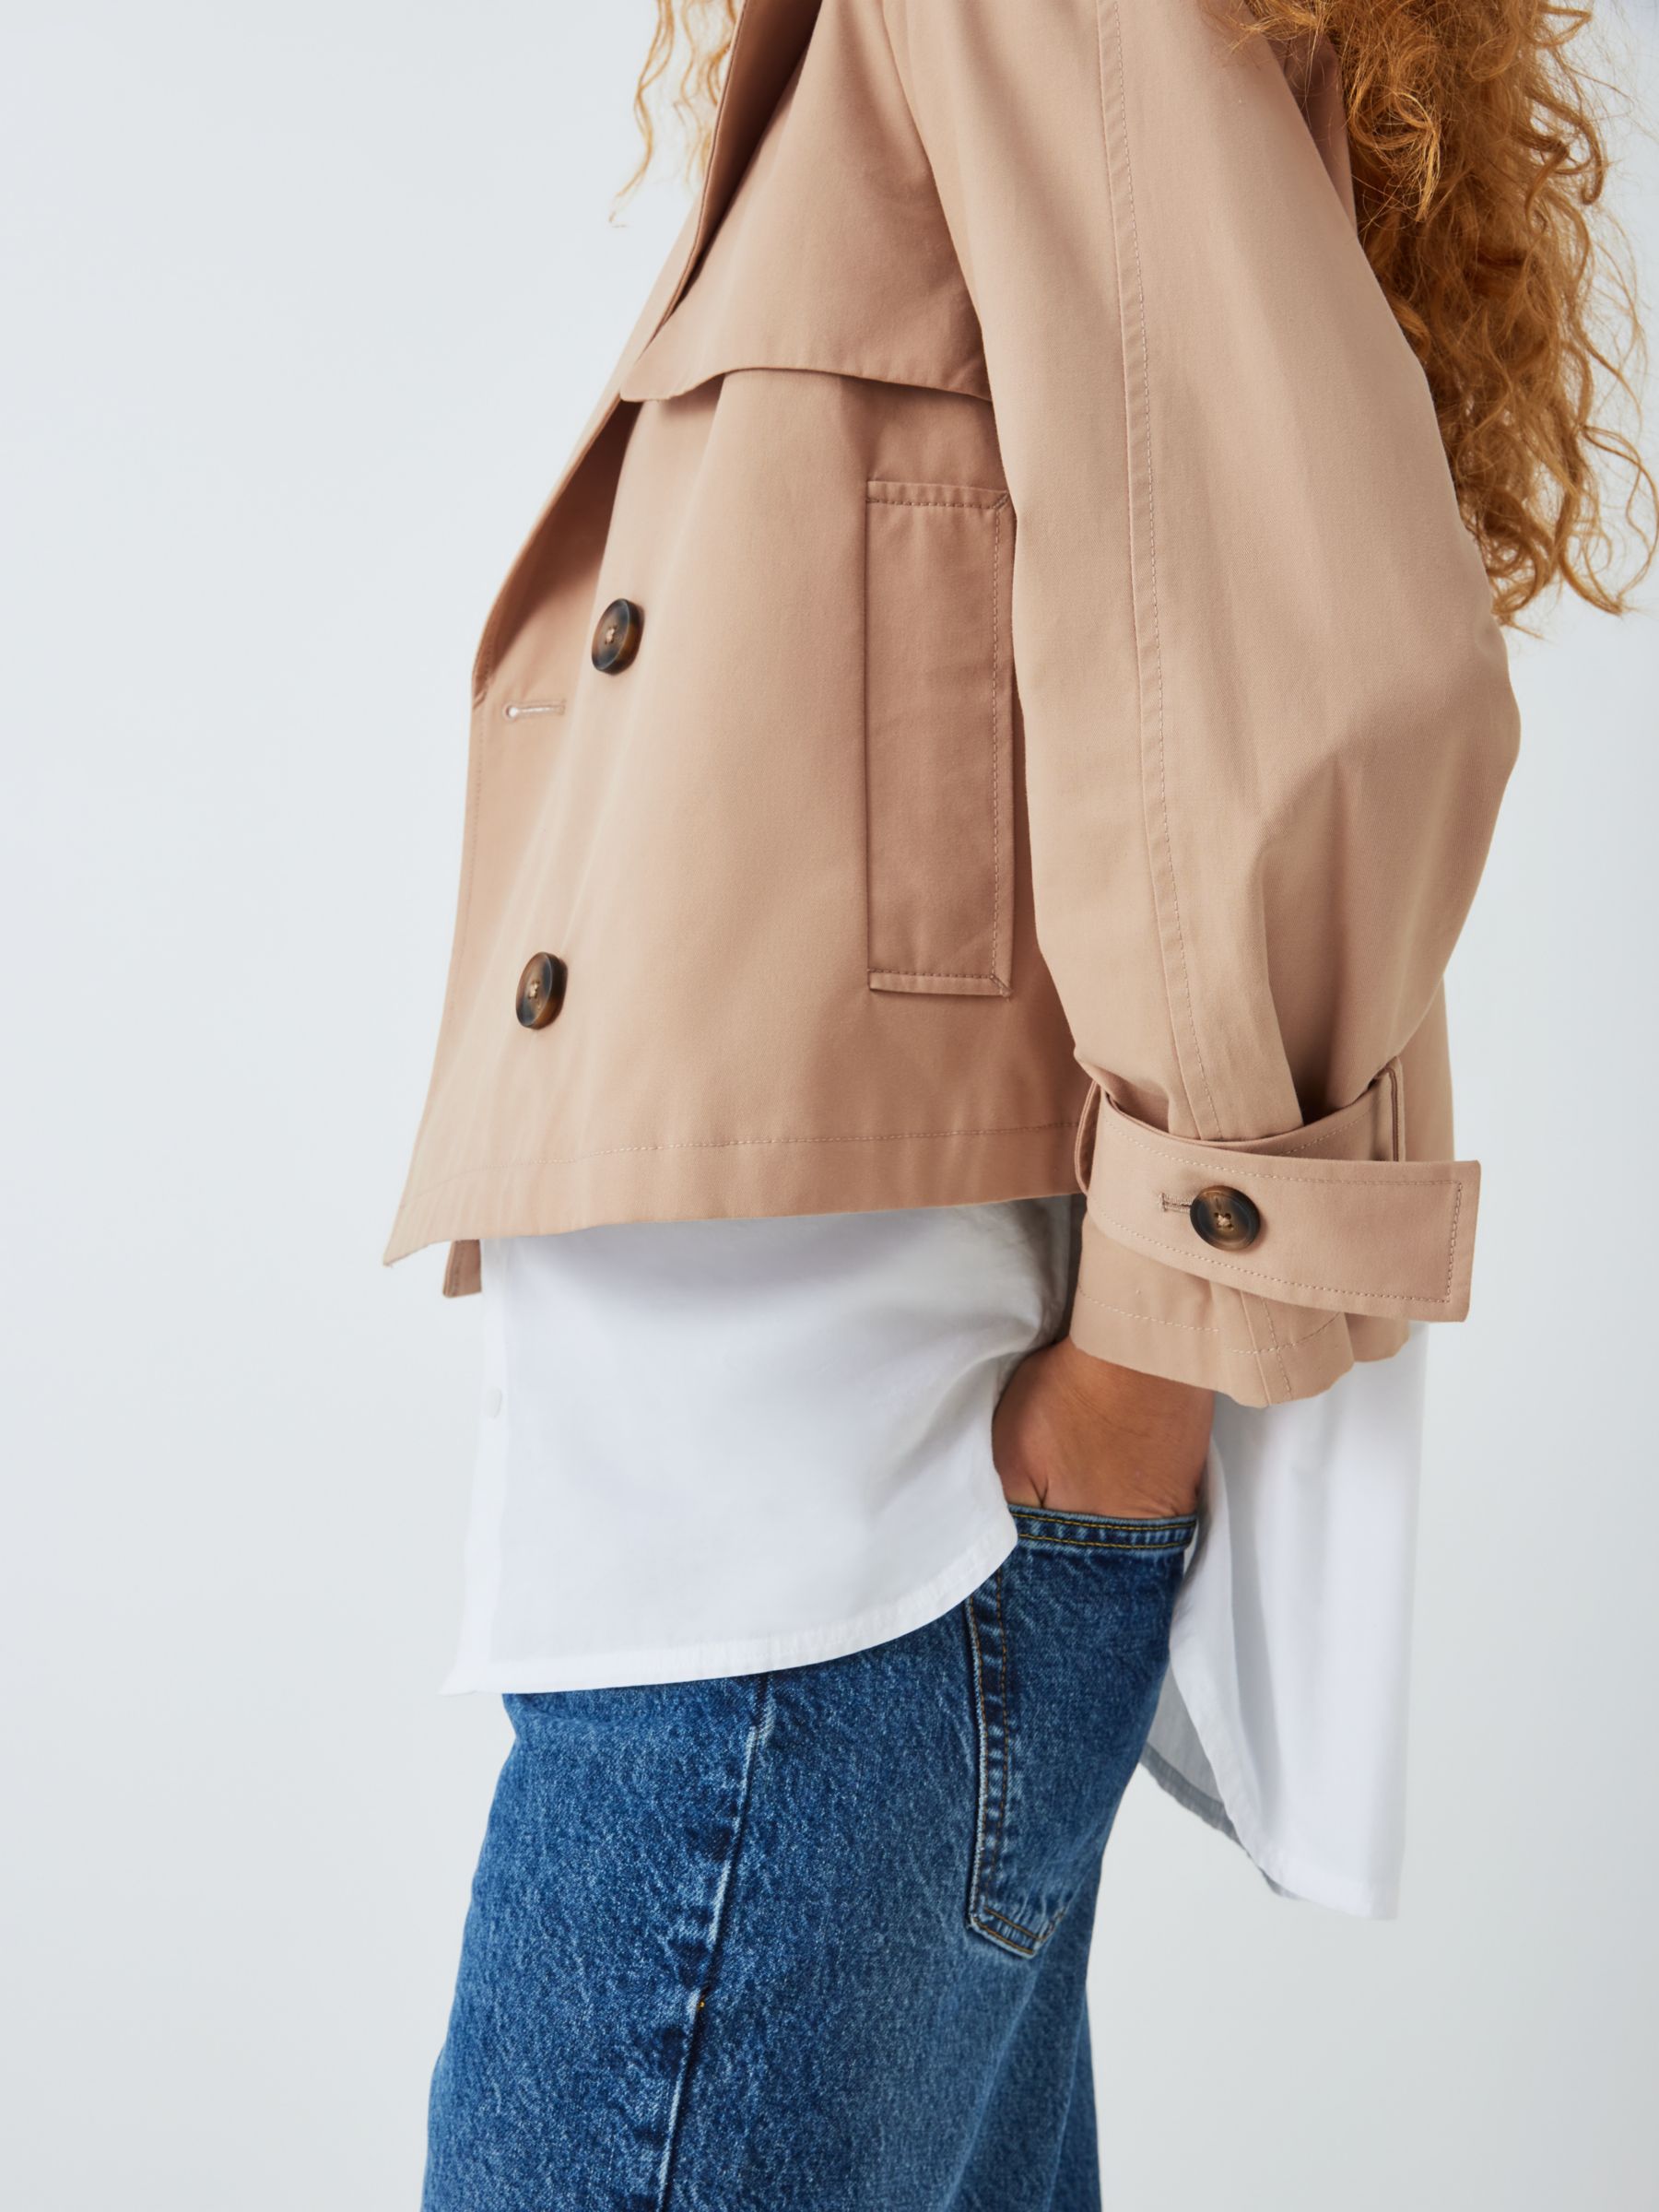 John Lewis ANYDAY Cropped Trench Coat, Stone, XS